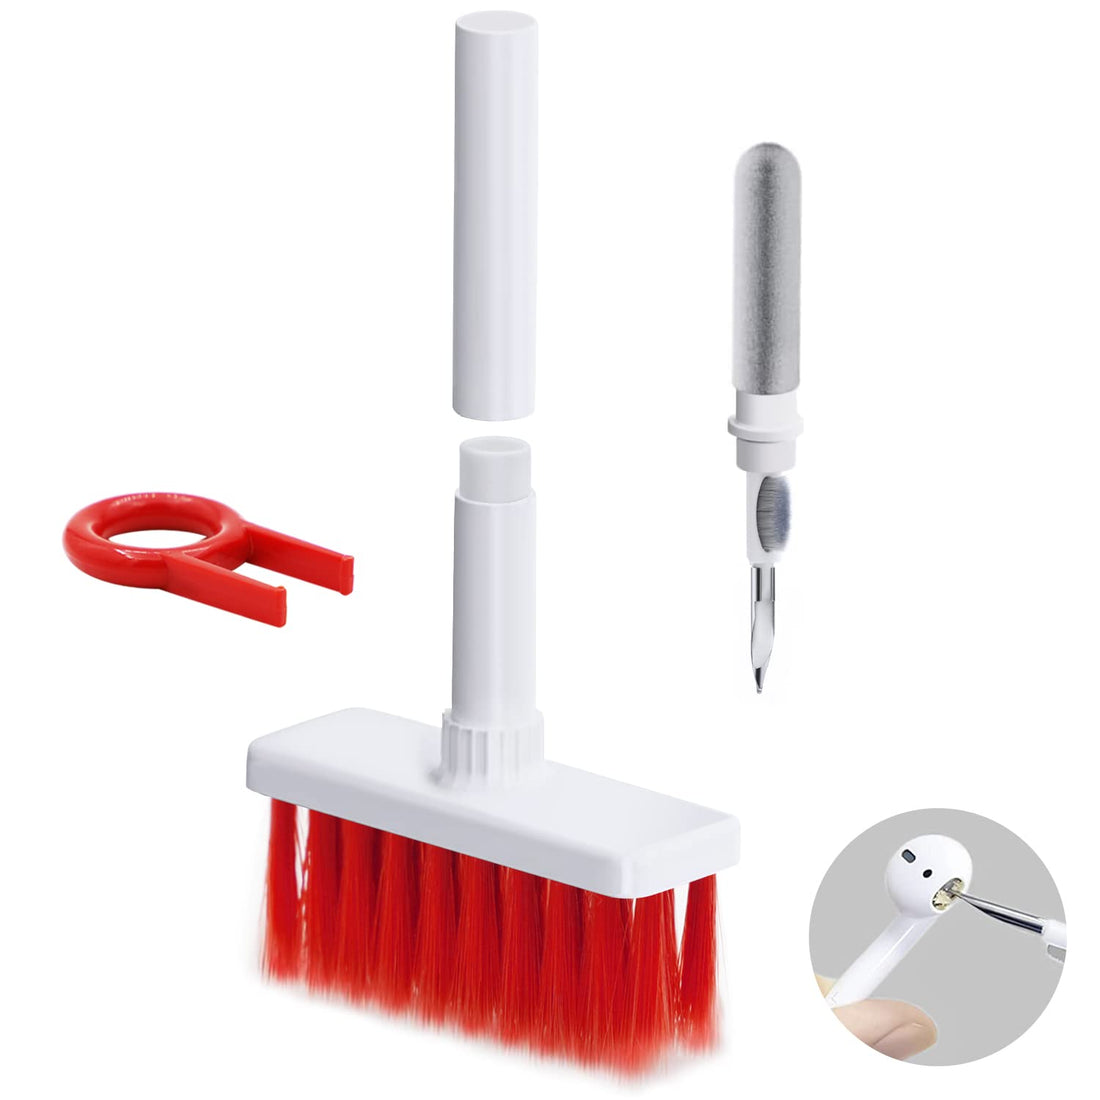 5 in 1 Keyboard Cleaning Brush - Import Quality